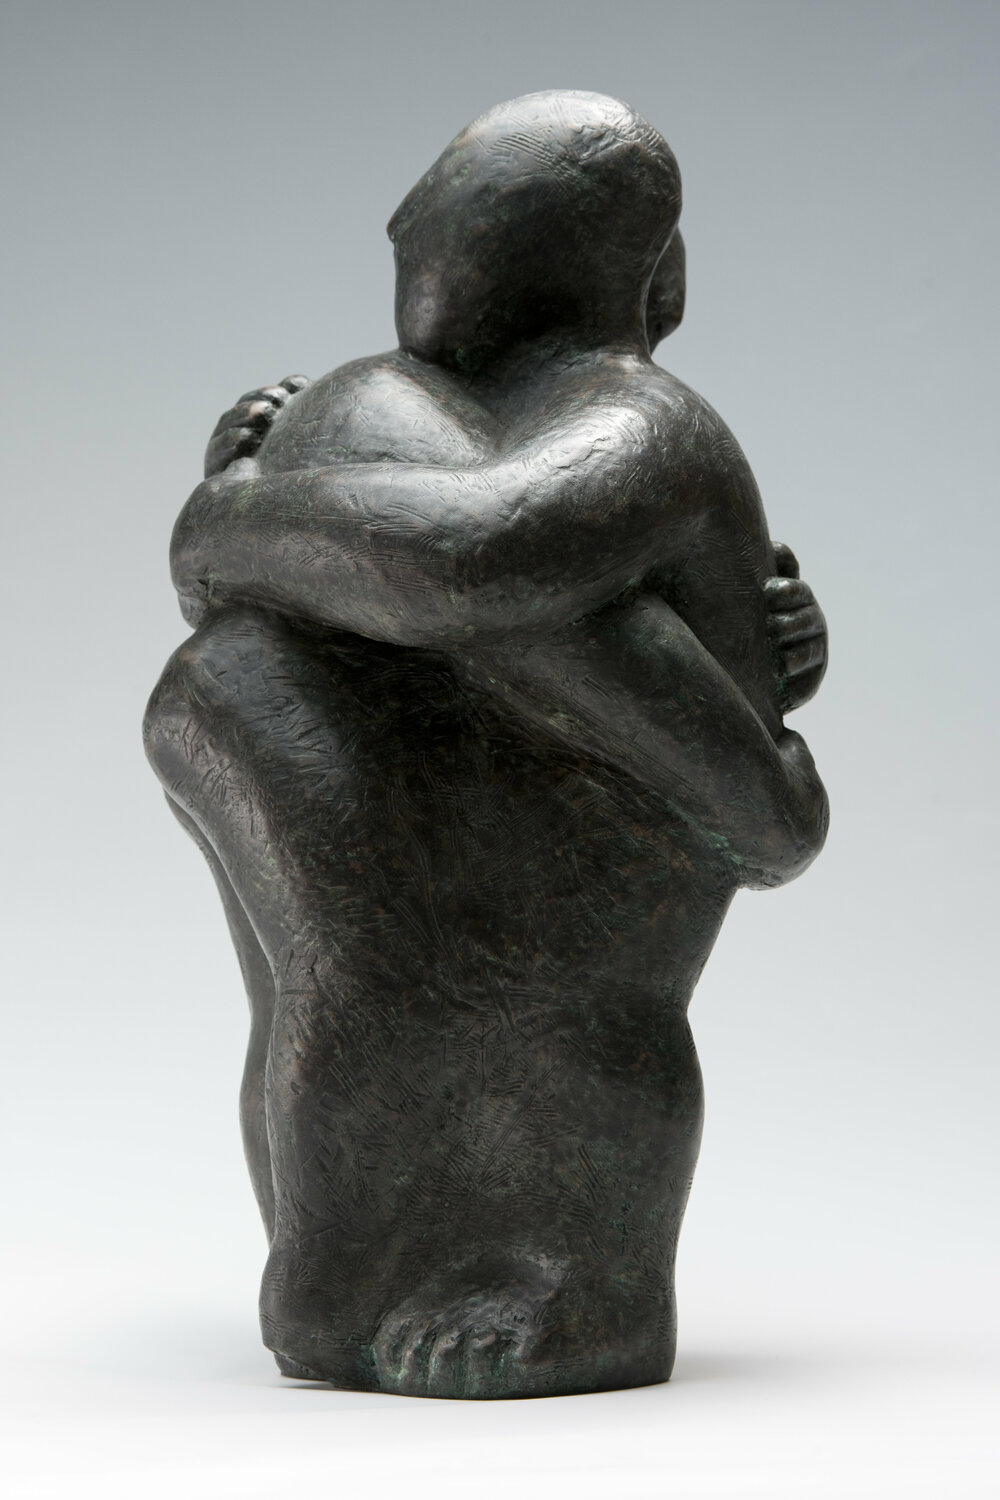 Small Embrace II by Beatrice Hoffman